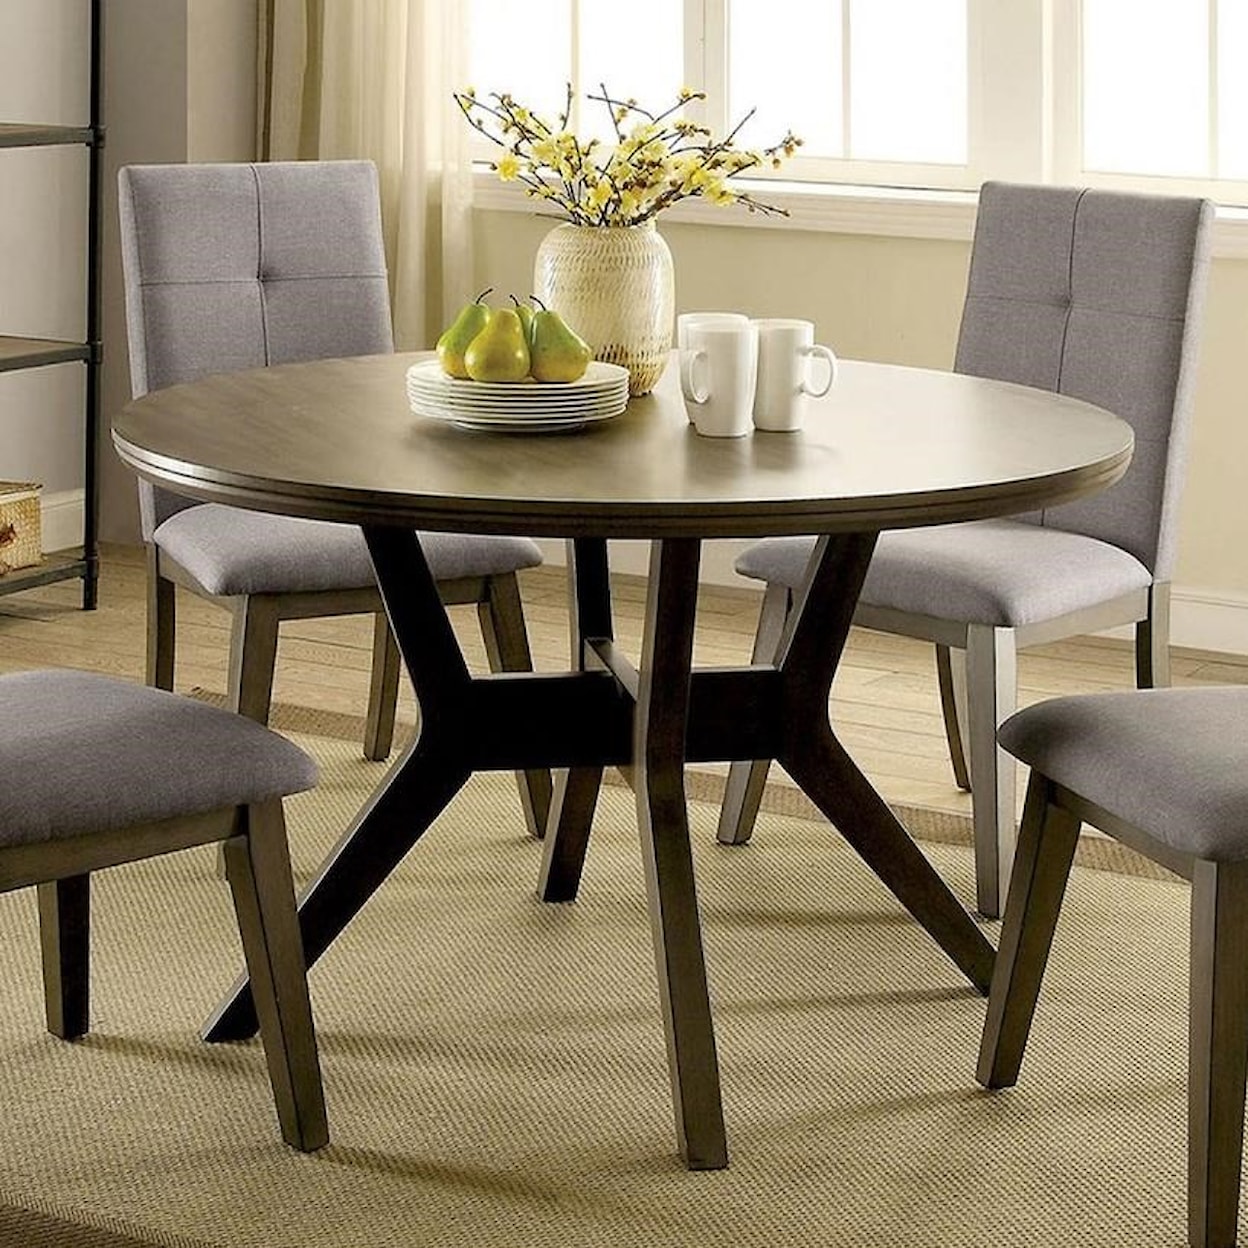 Furniture of America Abelone Round Table